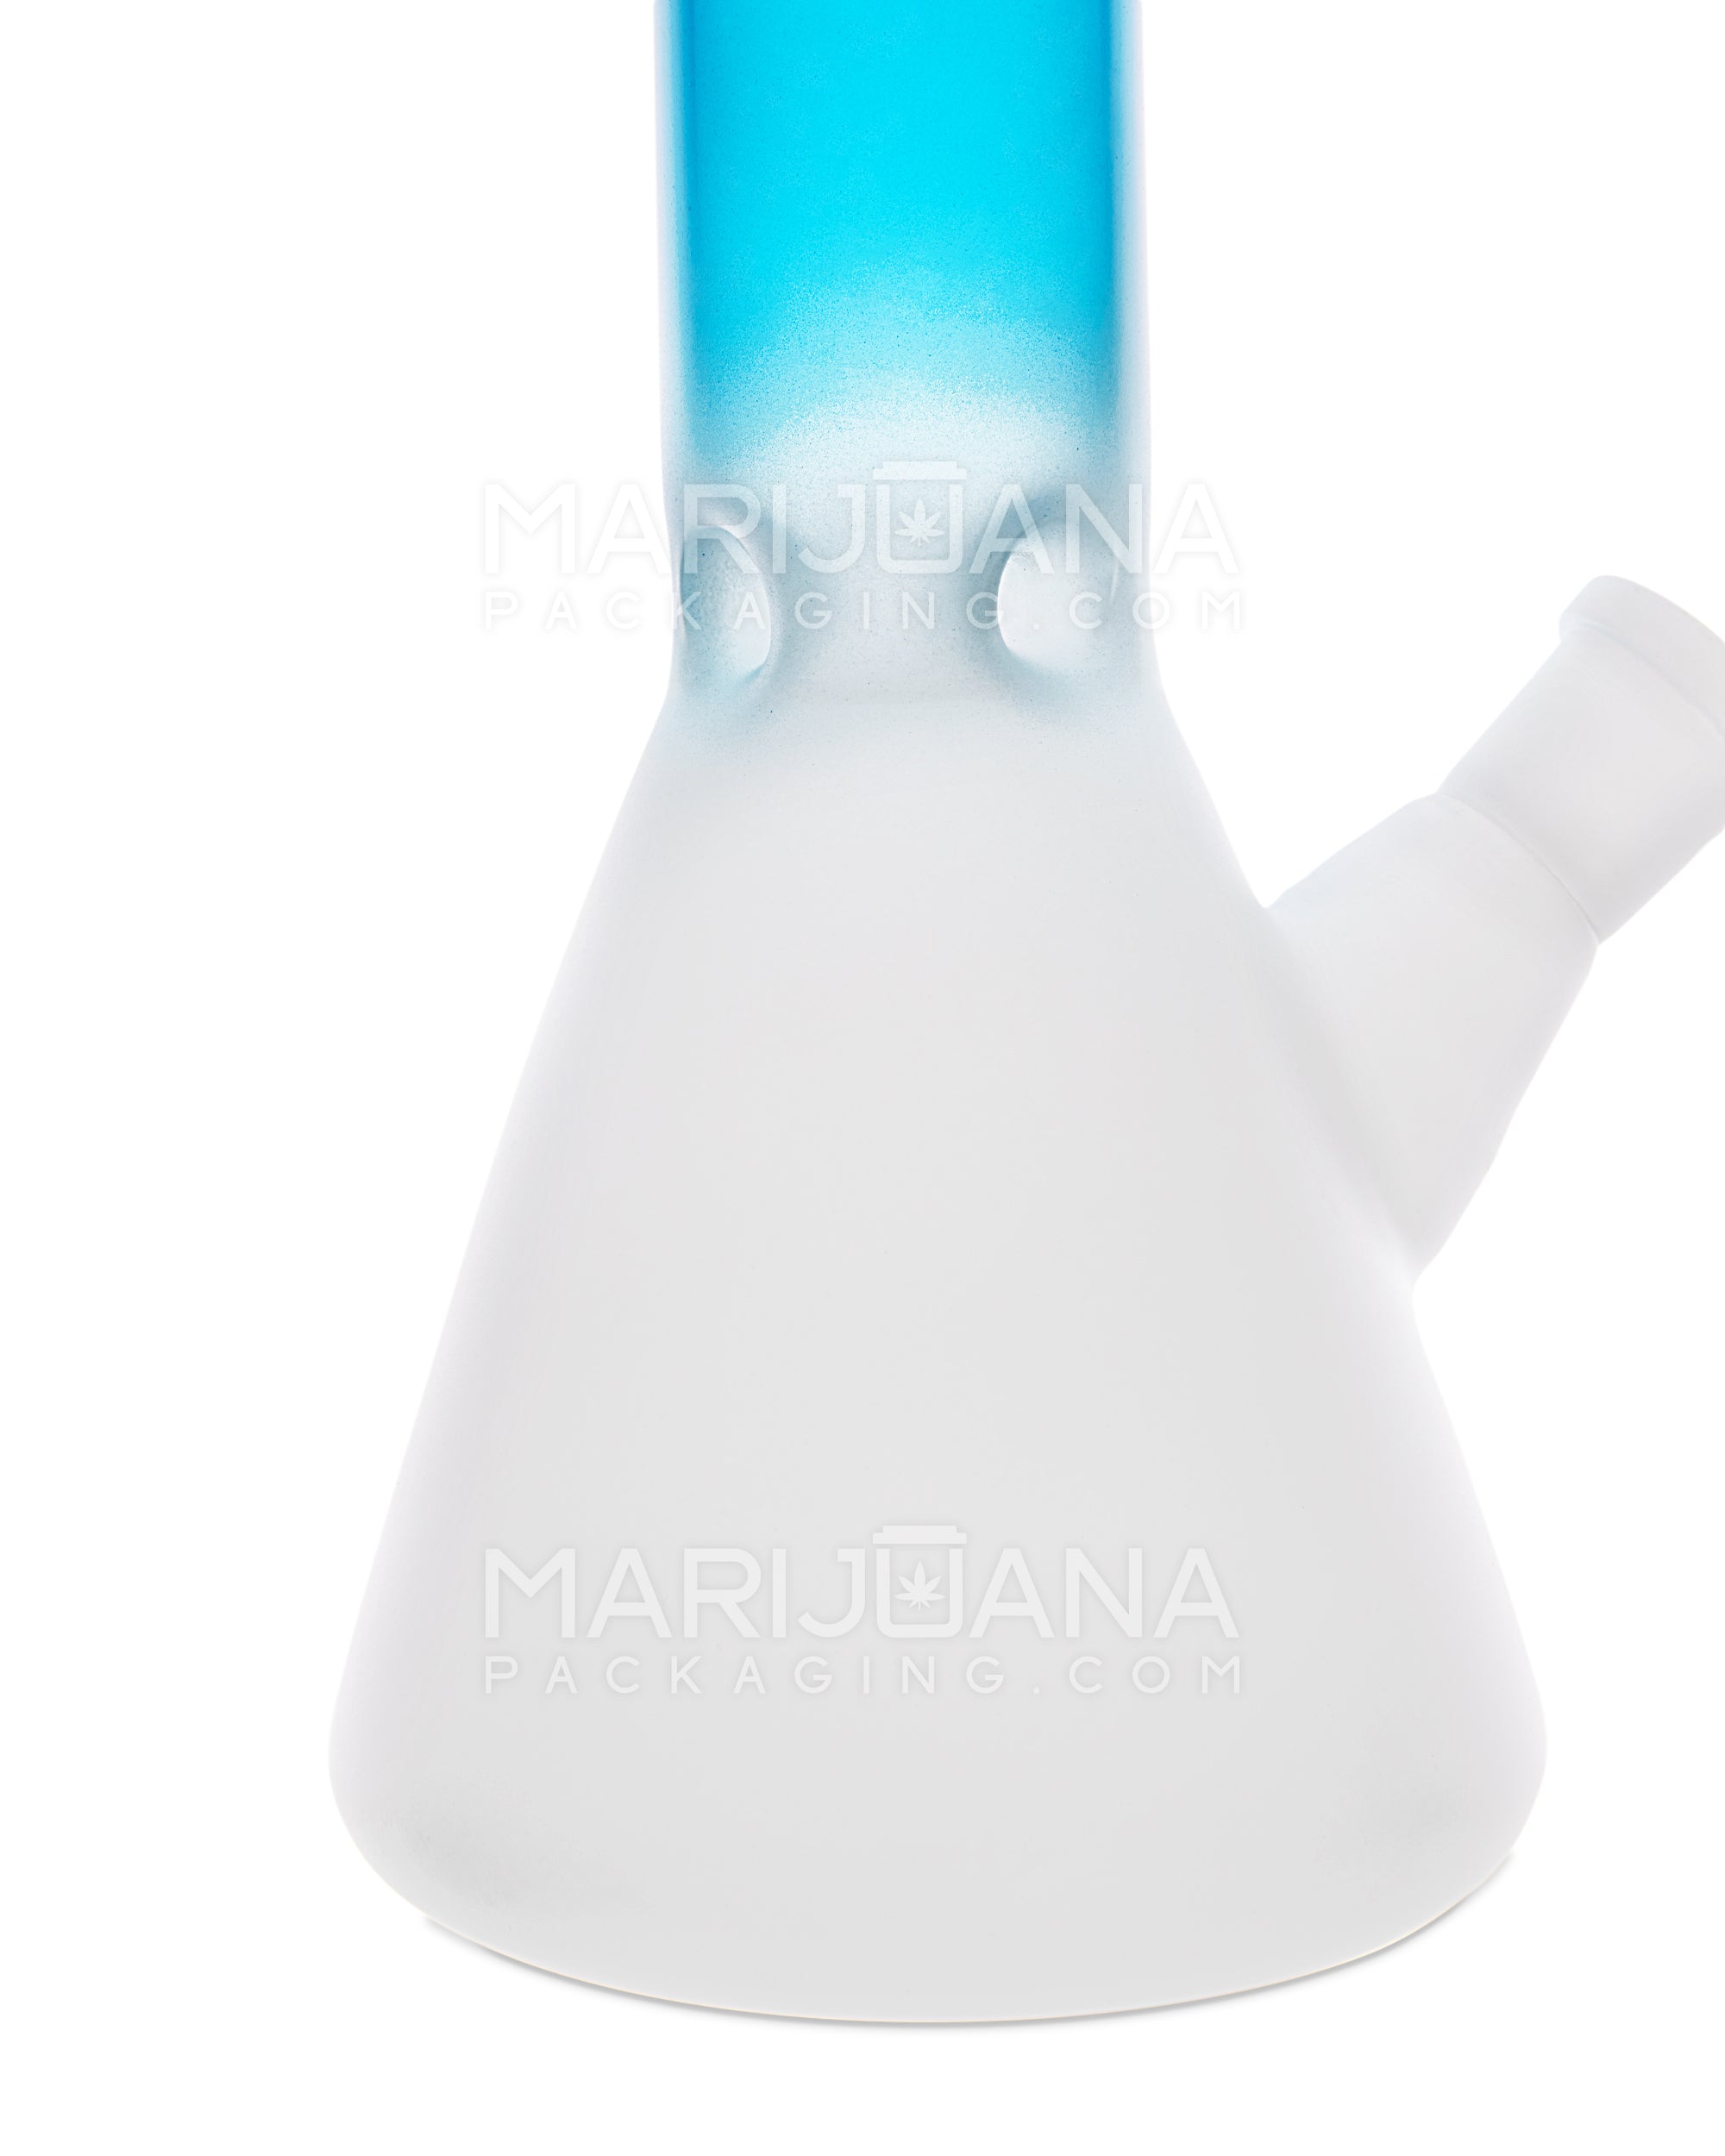 Straight Neck Glass Beaker Water Pipe w/ Ice Catcher | 14in Tall - 14mm Bowl - Blue/White